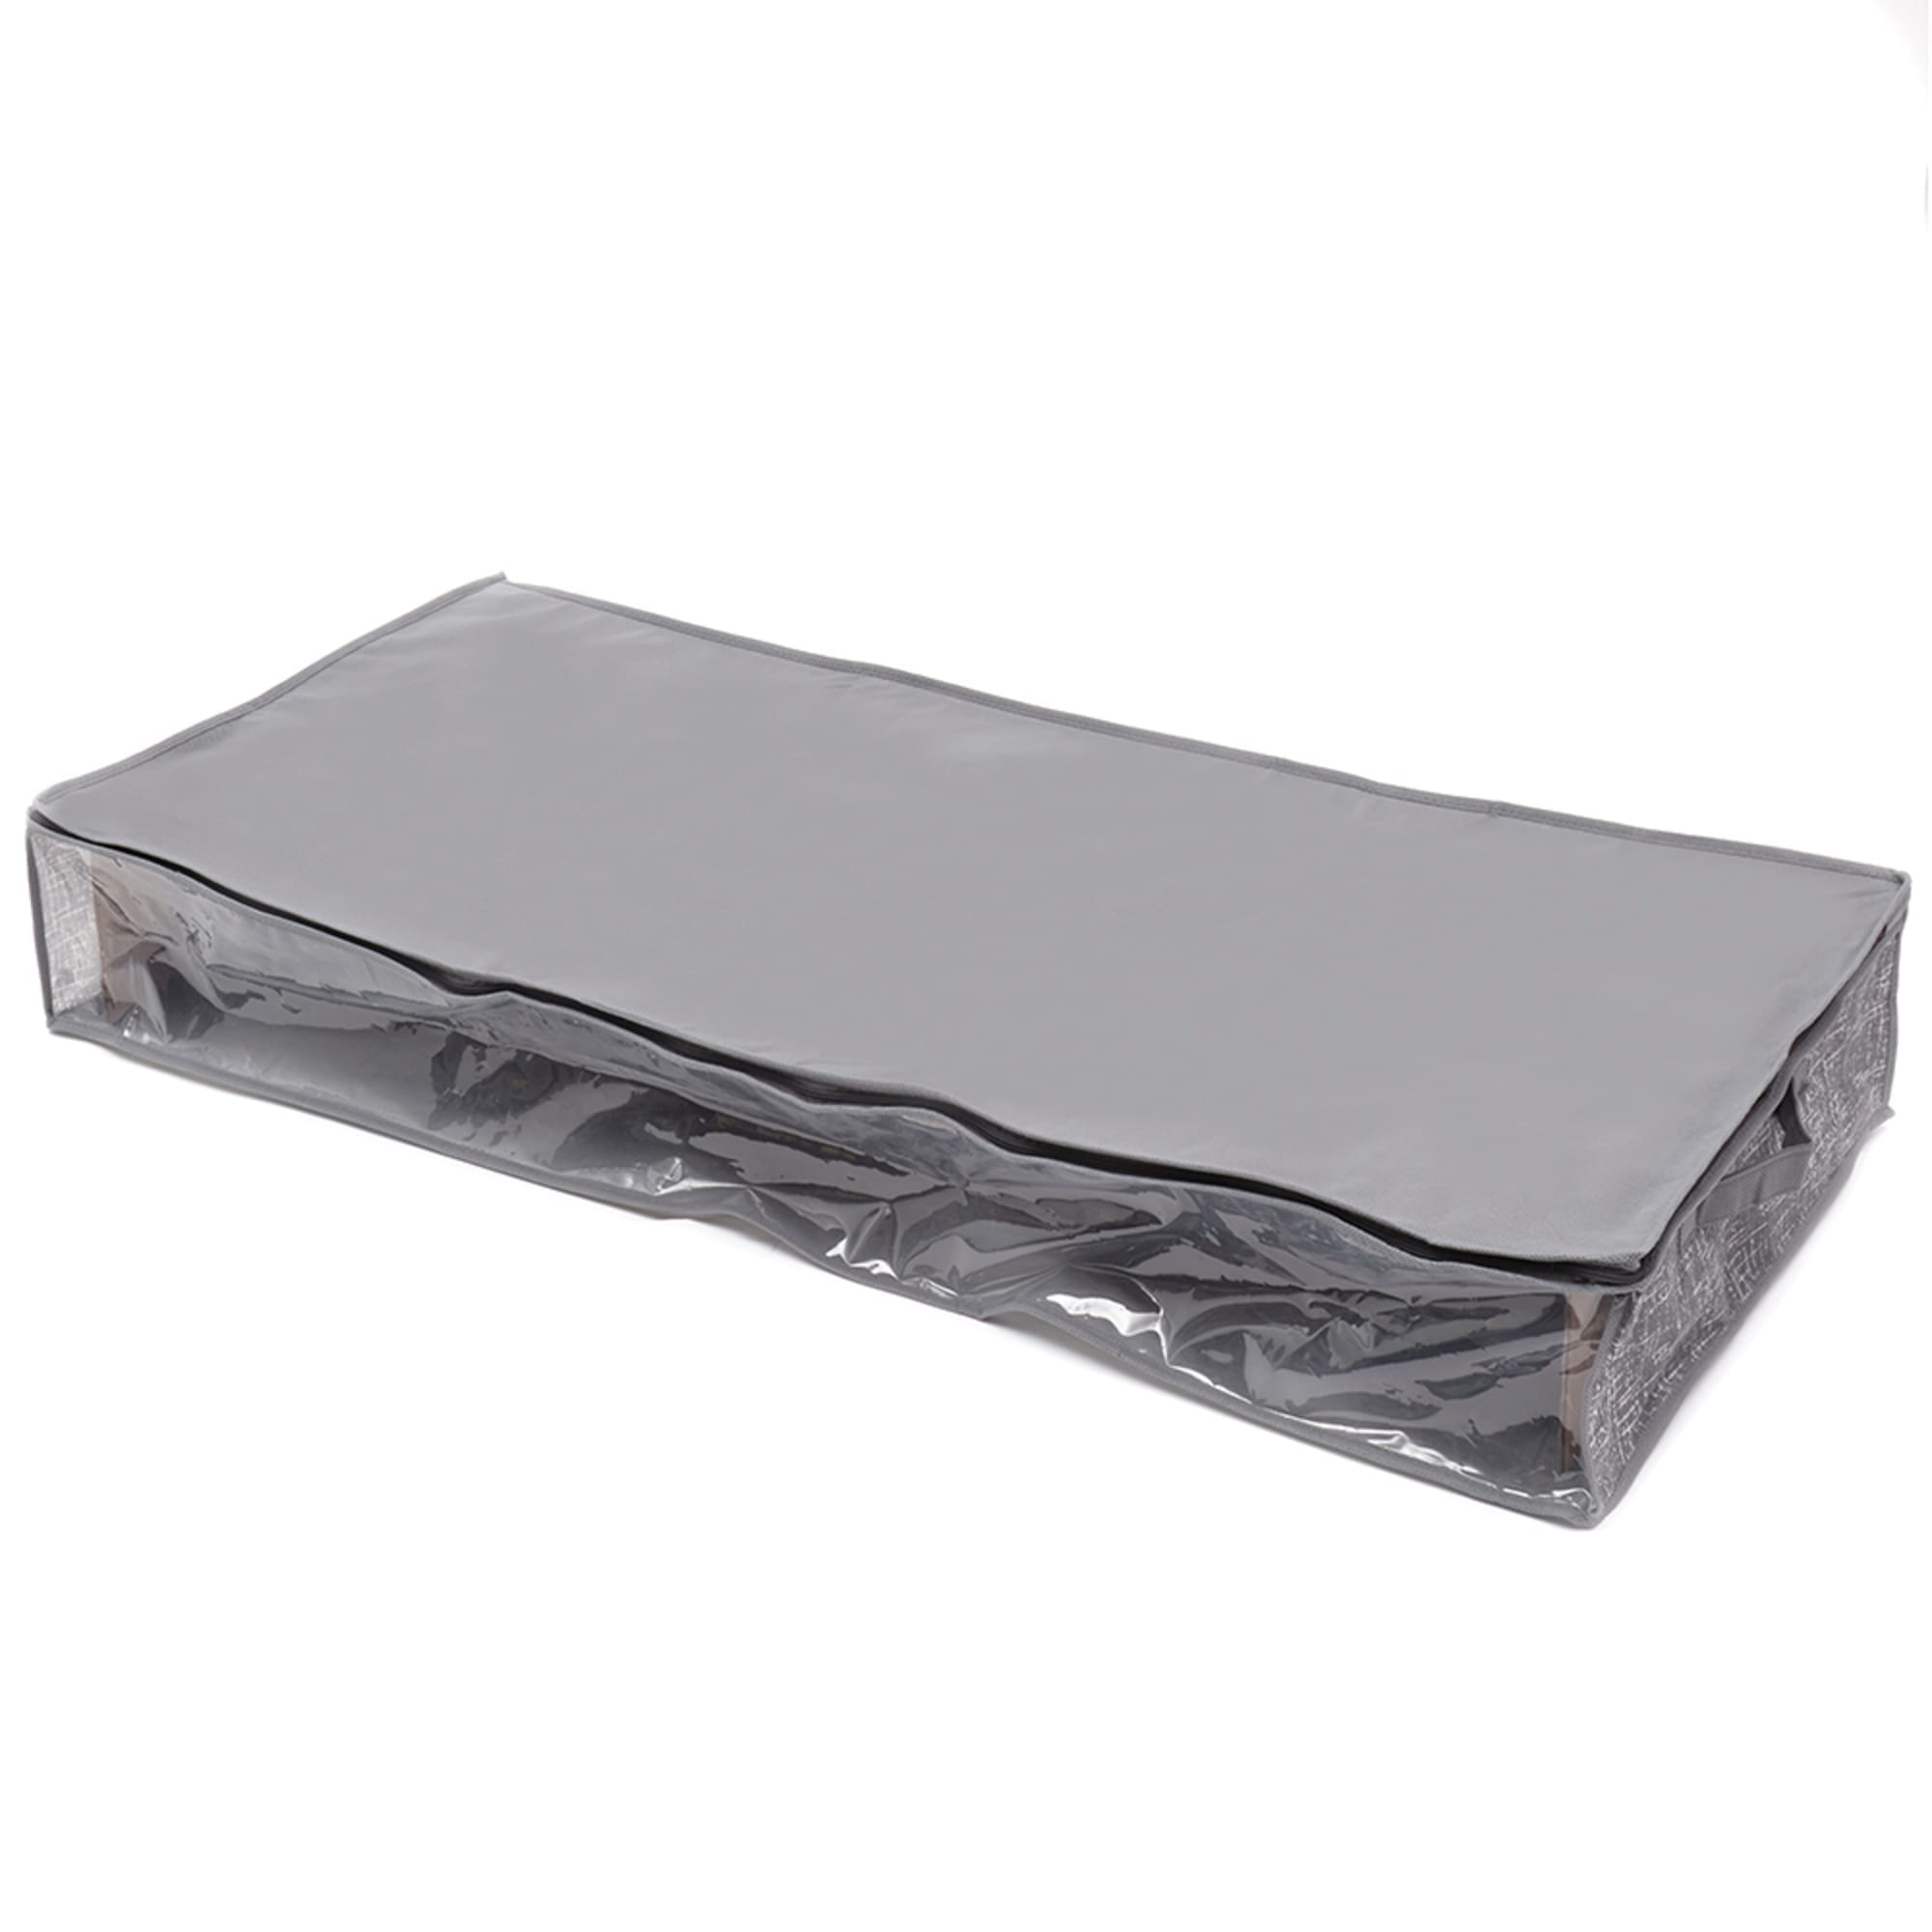 Home Basics Graph Line Non-Woven Under the Bed Storage Bag, Grey $4.00 EACH, CASE PACK OF 12